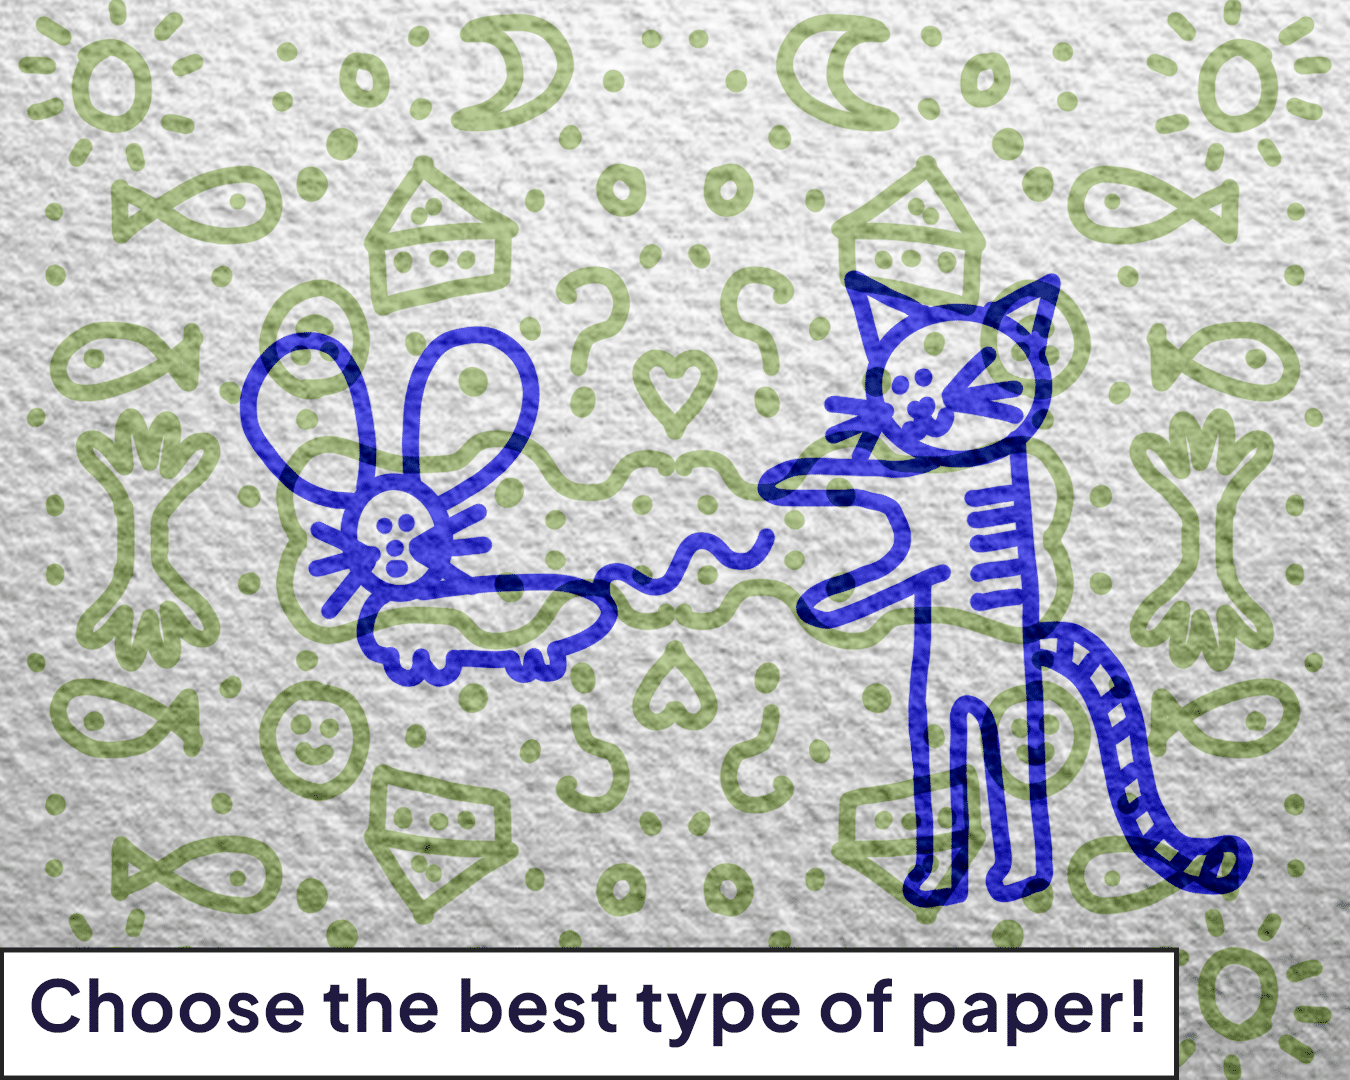 Choose the type of paper